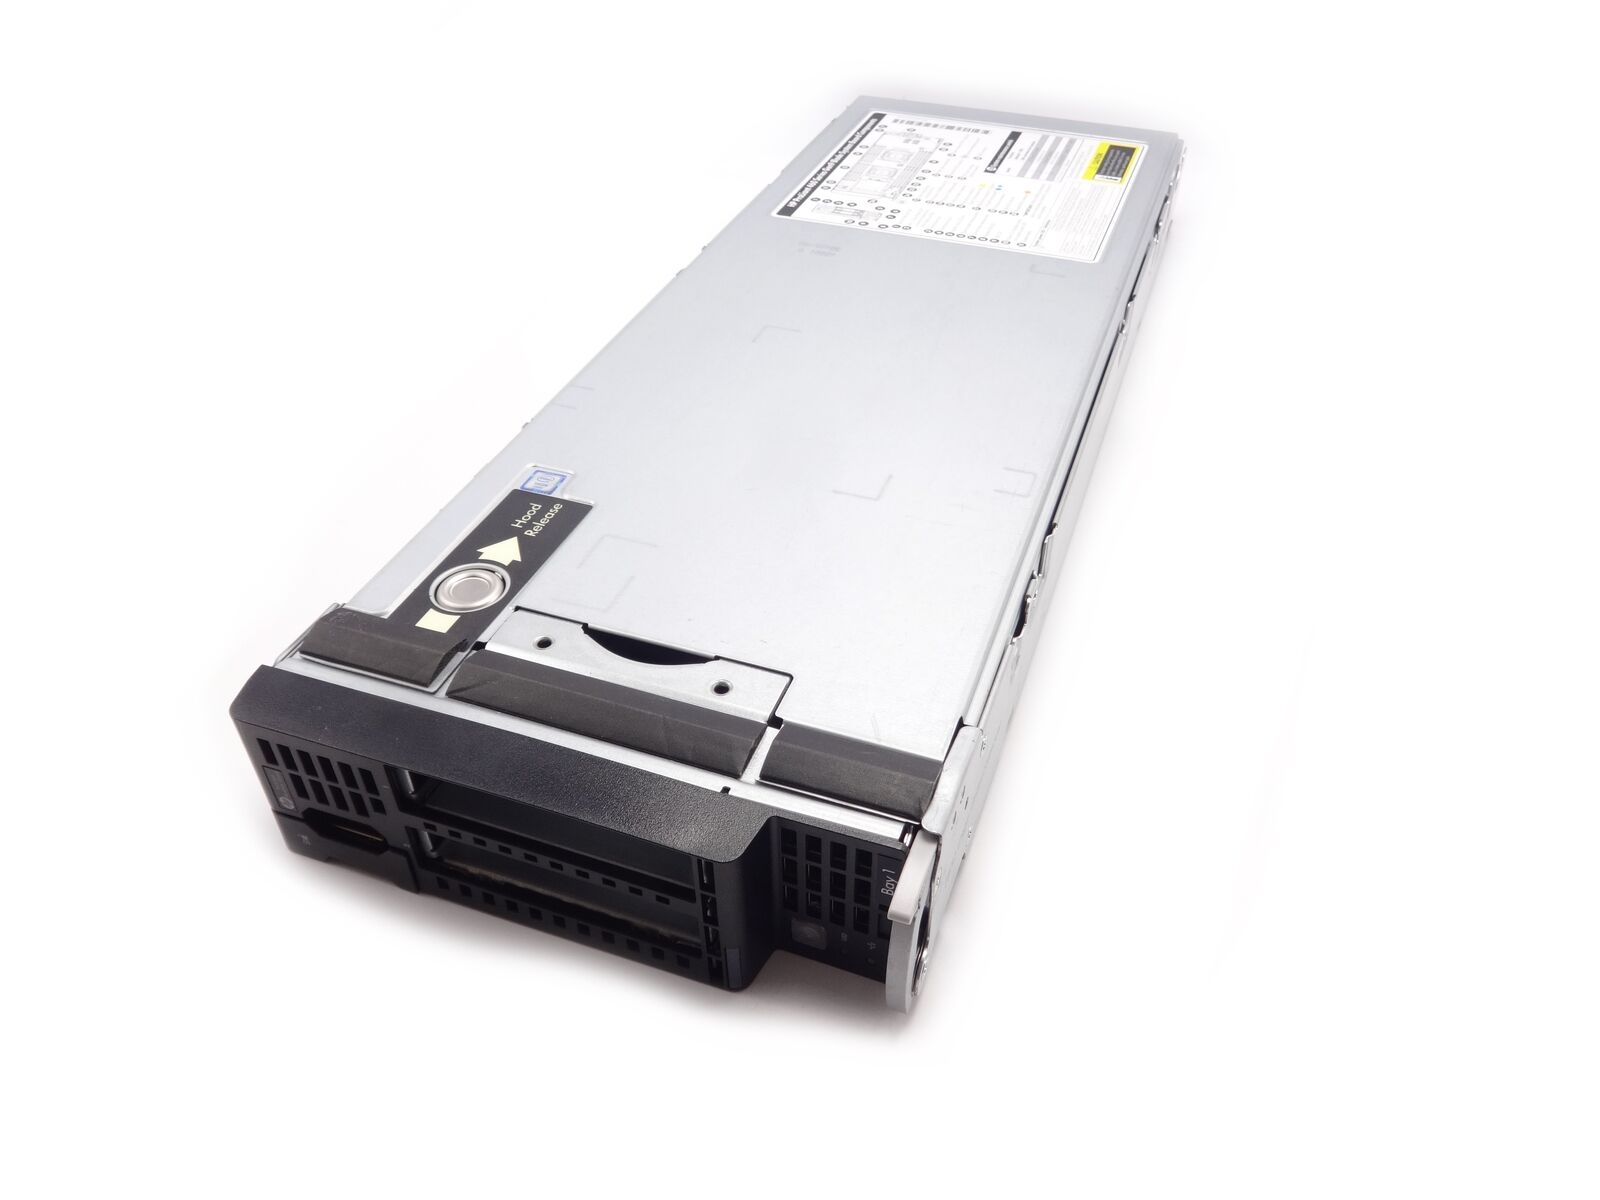 HPe 813198-B21 HP Proliant BL460C G9 Blade Chassis